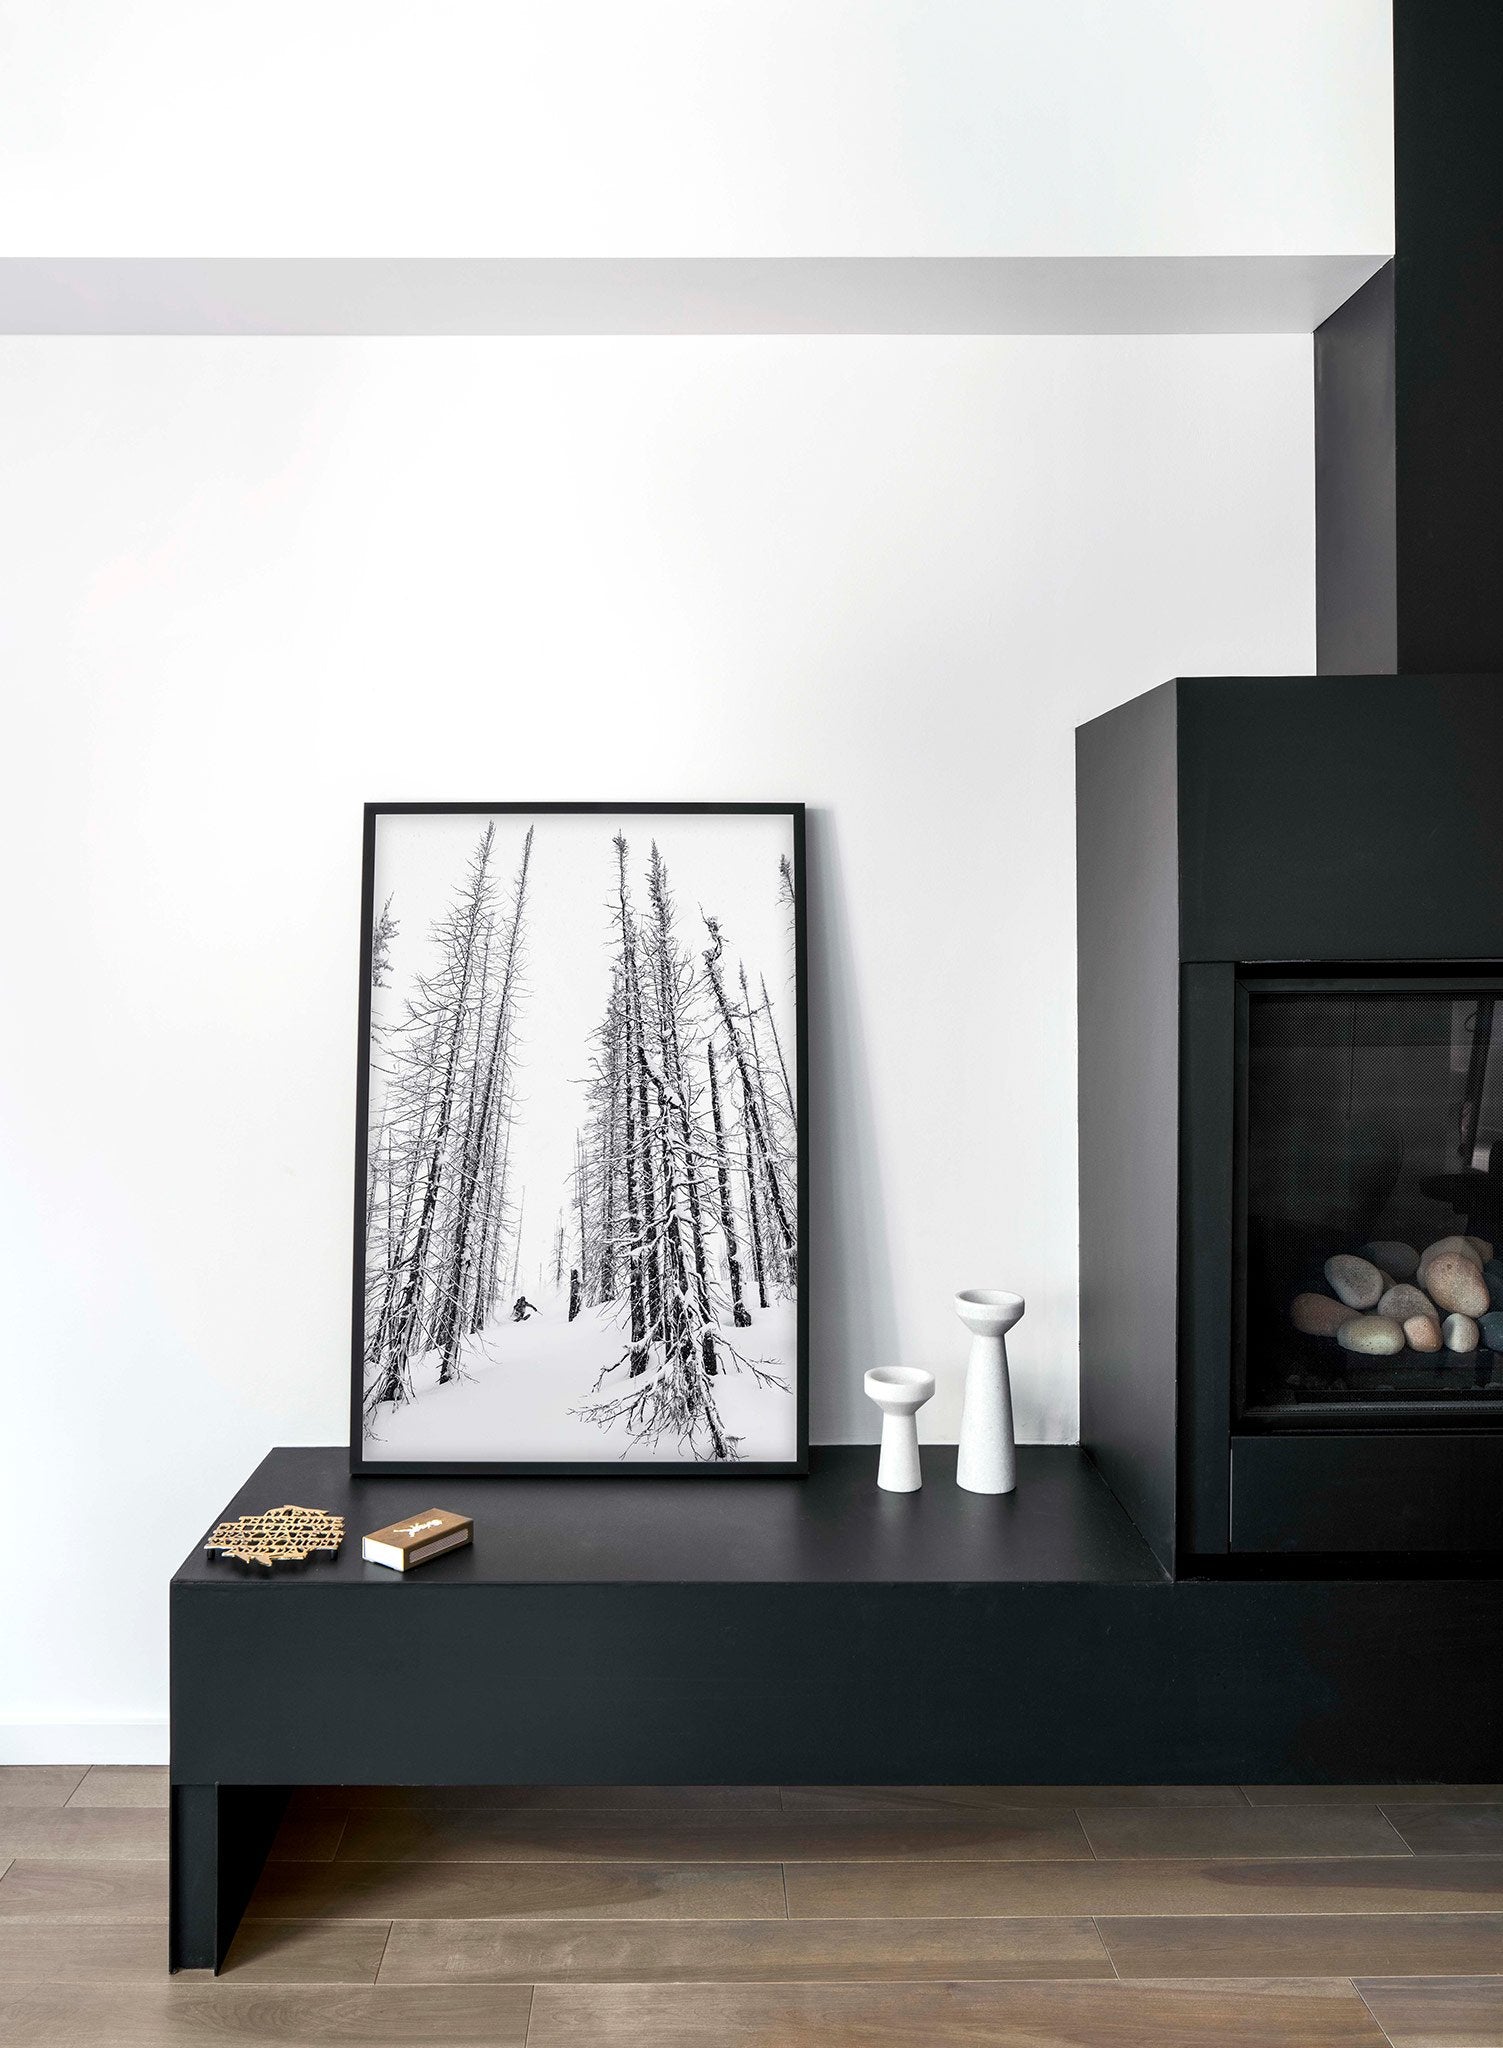 Landscape photography poster by Opposite Wall with trees in snow - Lifestyle - Living Room